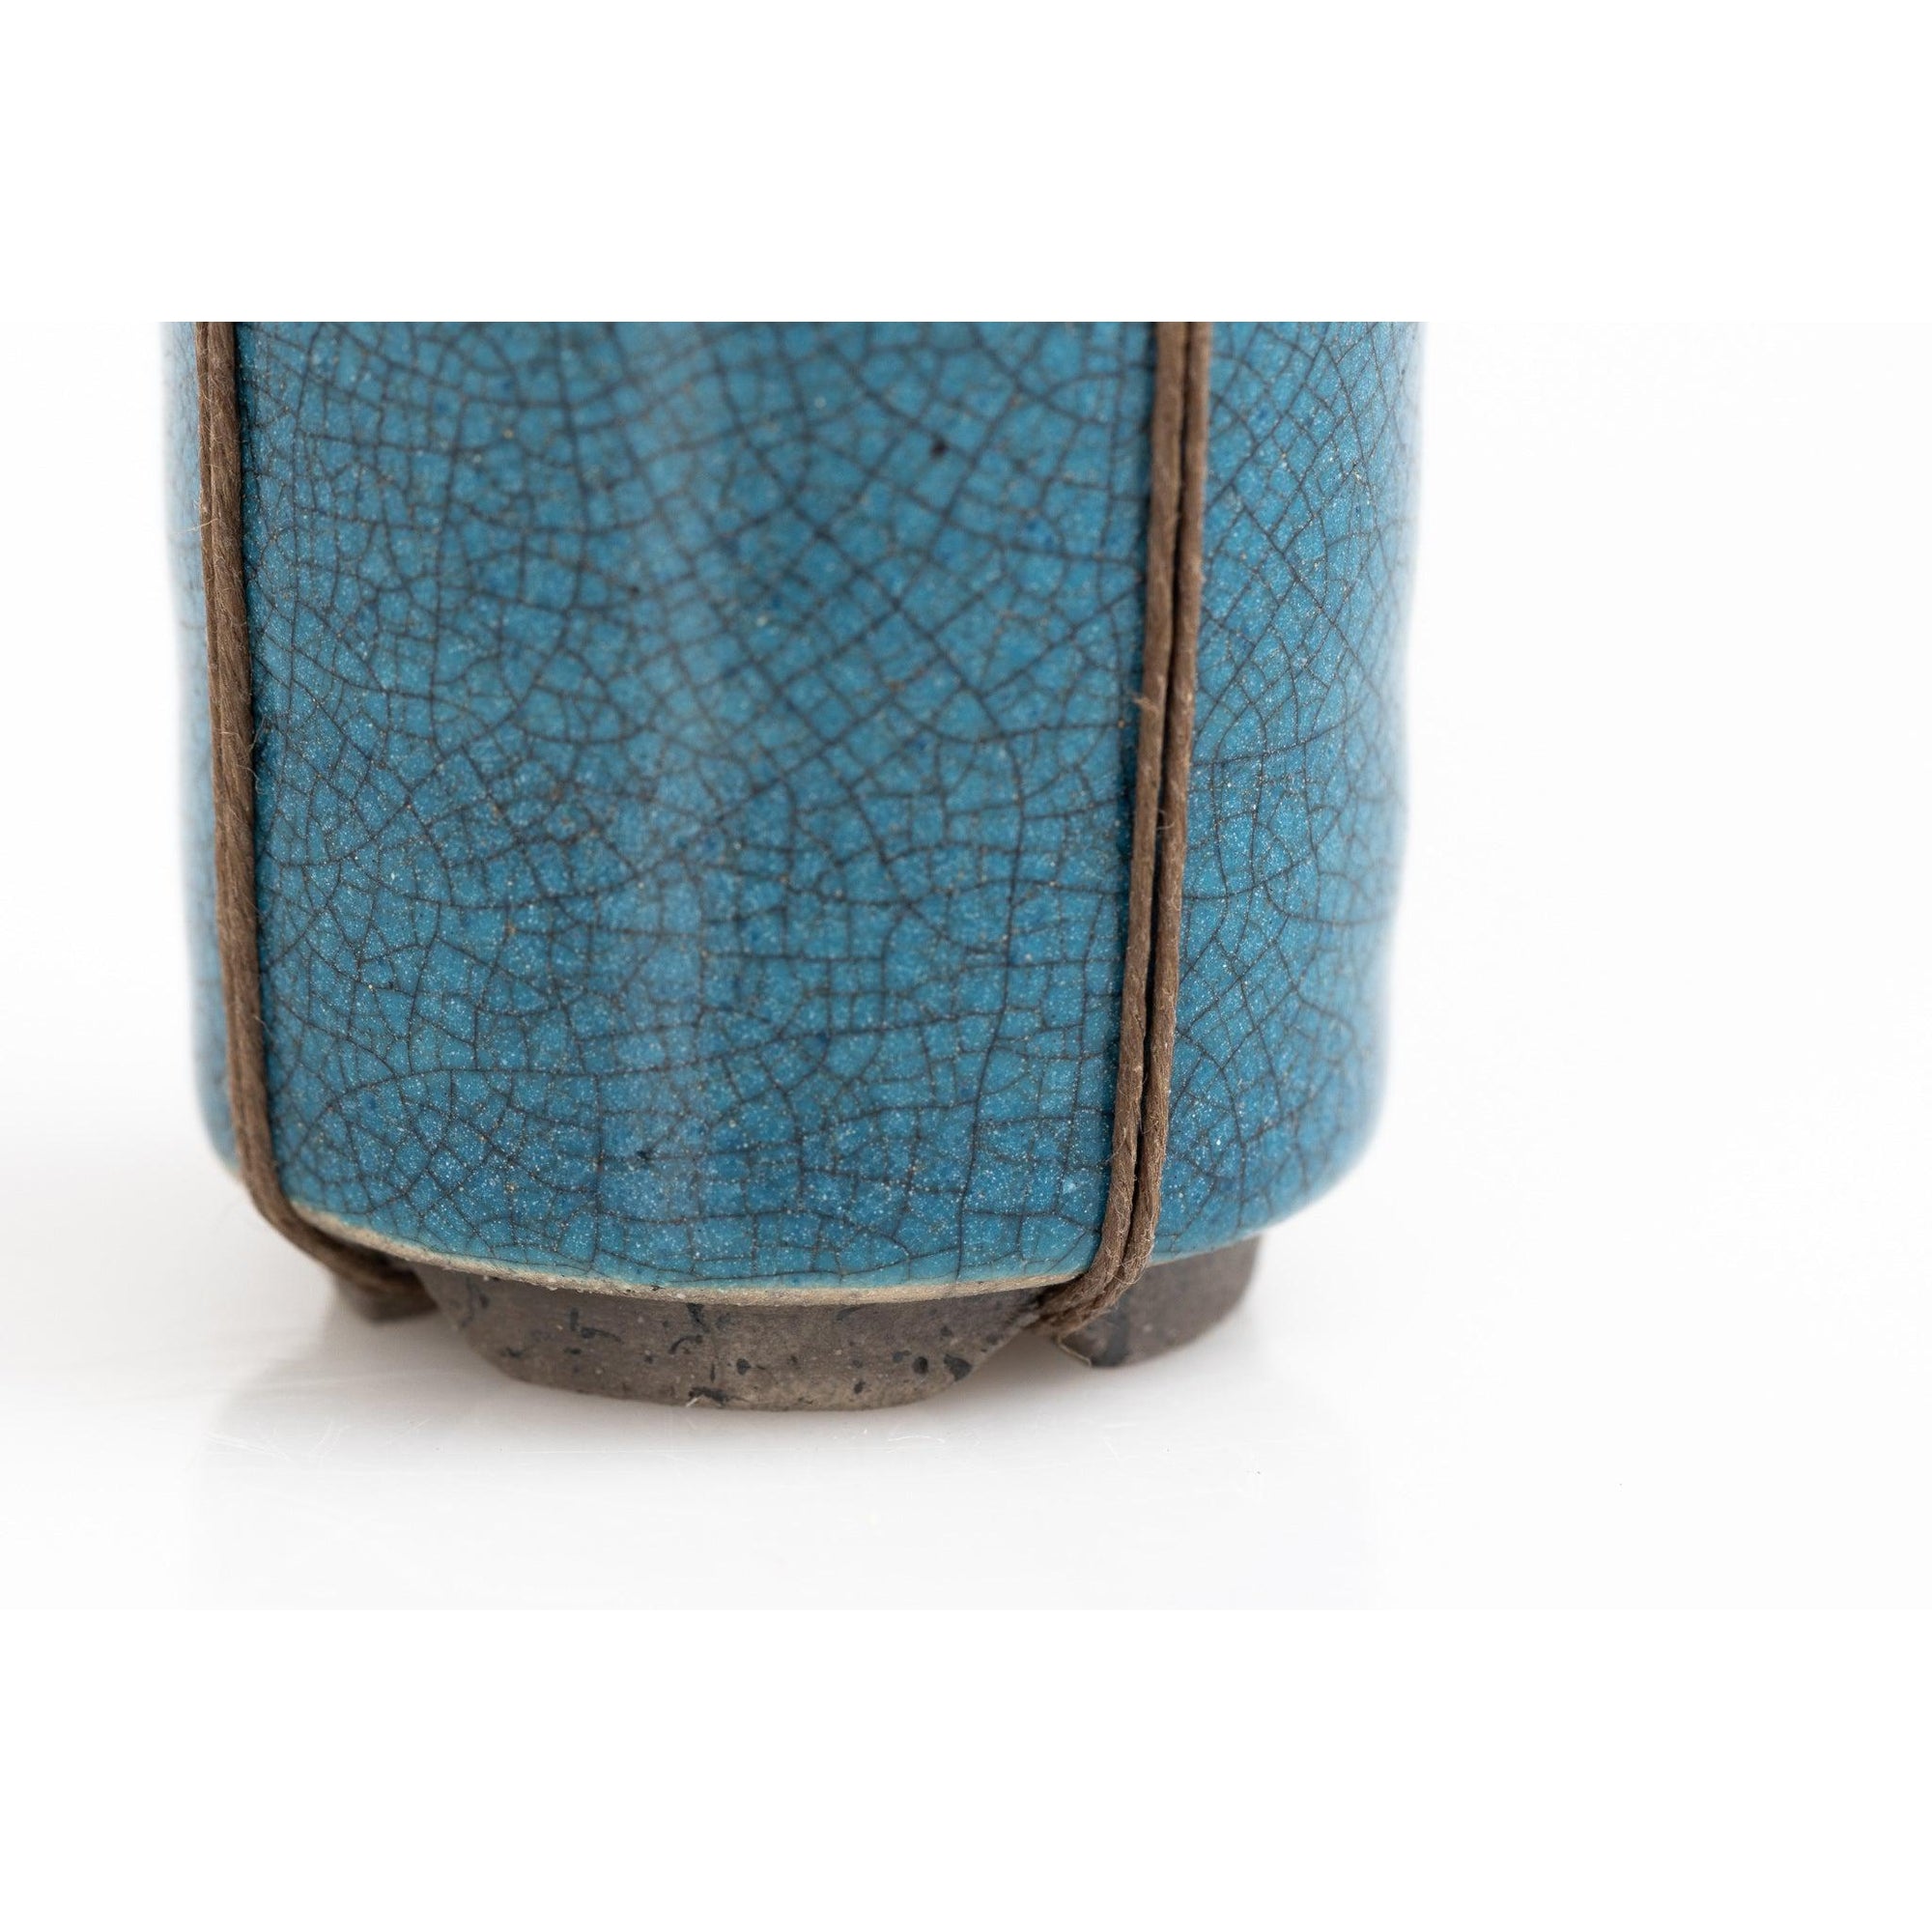 KSEE2 Raku Bound Container by Kate Schuricht, available at Padstow Gallery, Cornwall